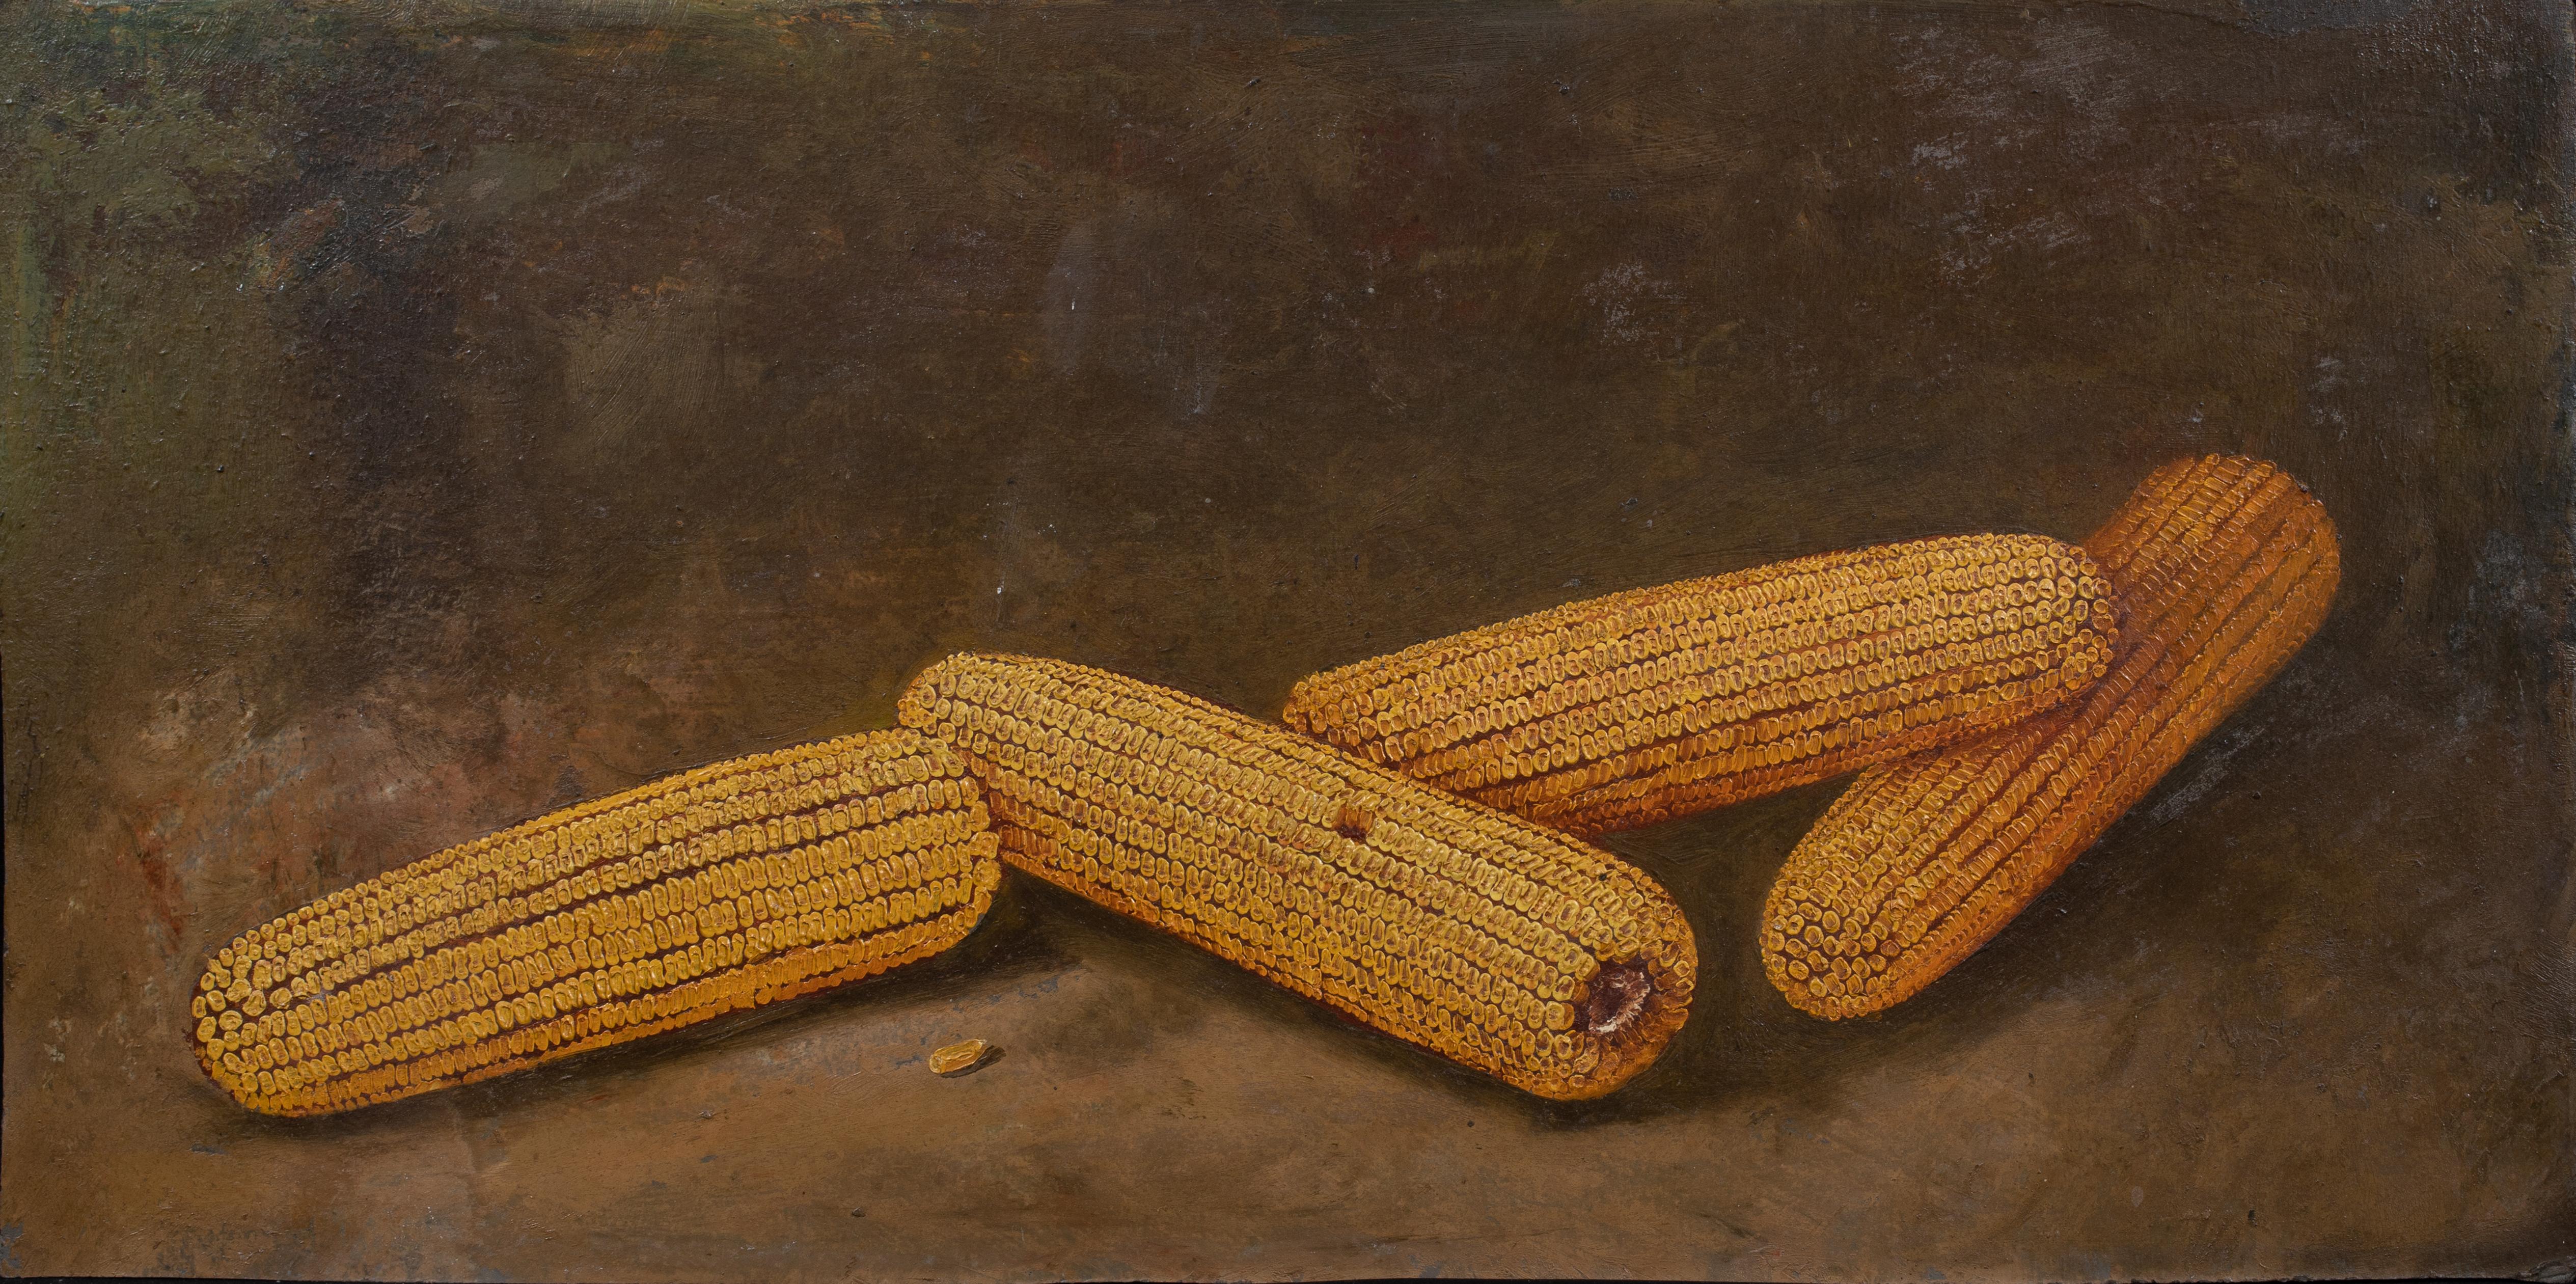 alfred montgomery Still-Life Painting - Study of Corn On The Cob, 19th Century